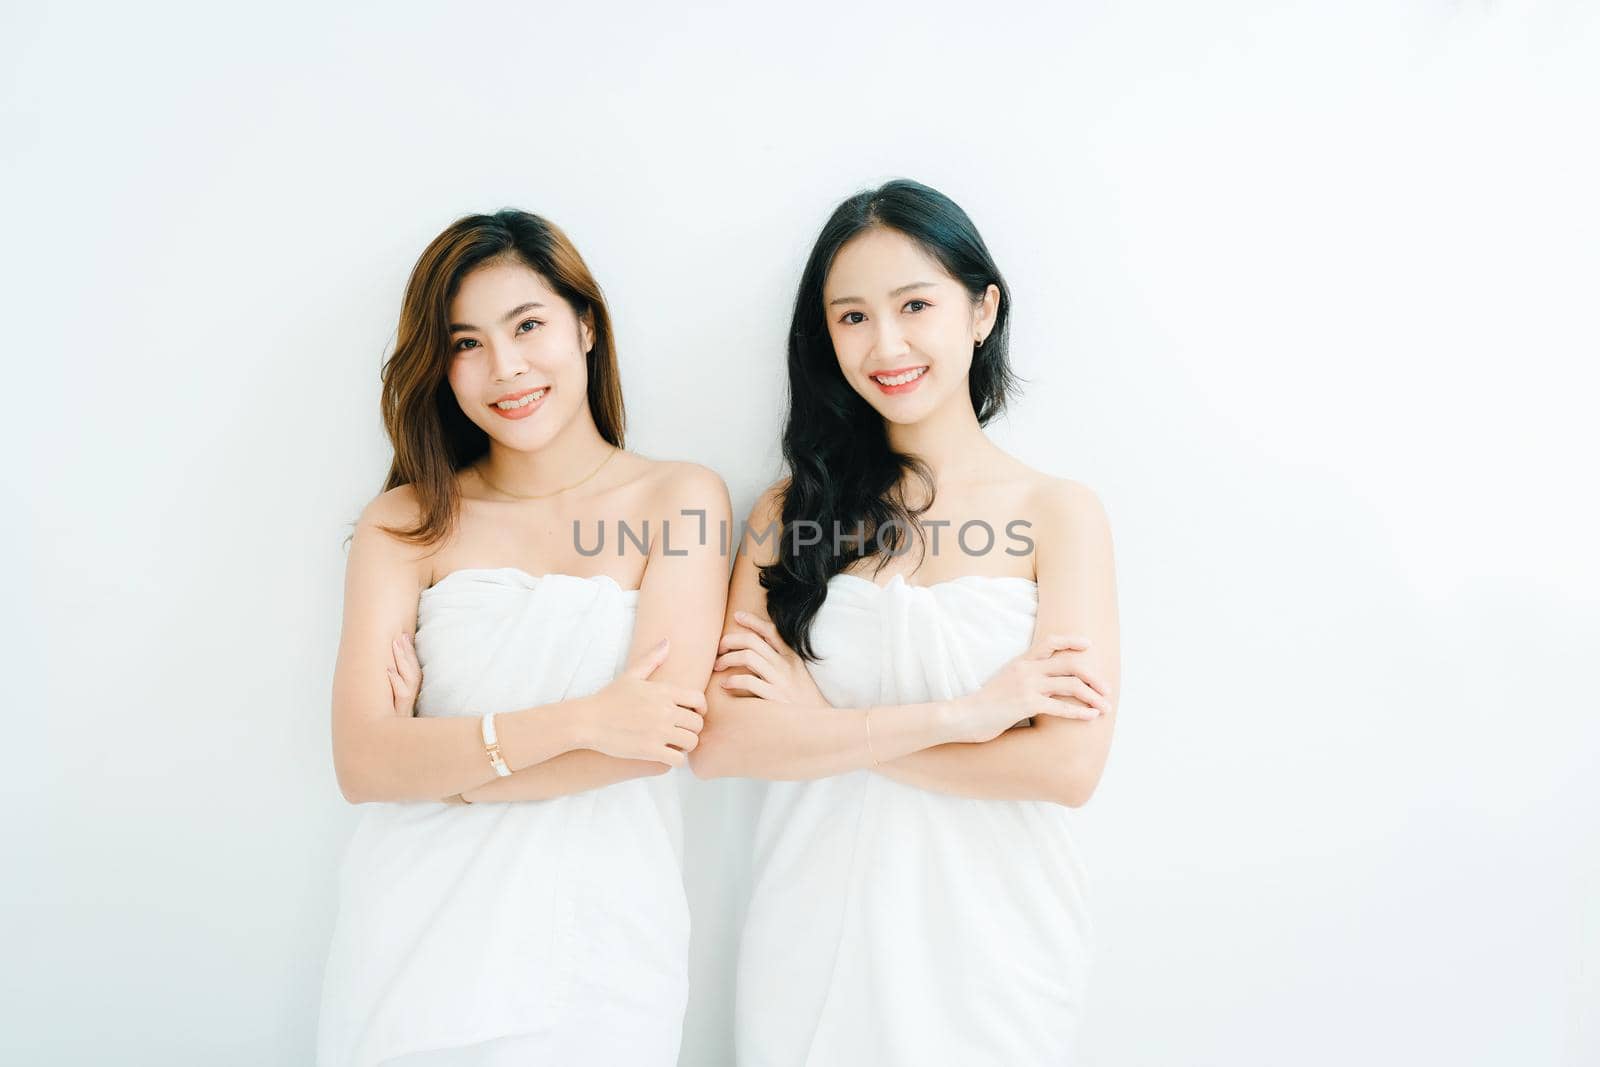 lgbtq, LGBT concept, homosexuality, portrait of two Asian women posing happy together and showing love for each other while taking a shower by Manastrong